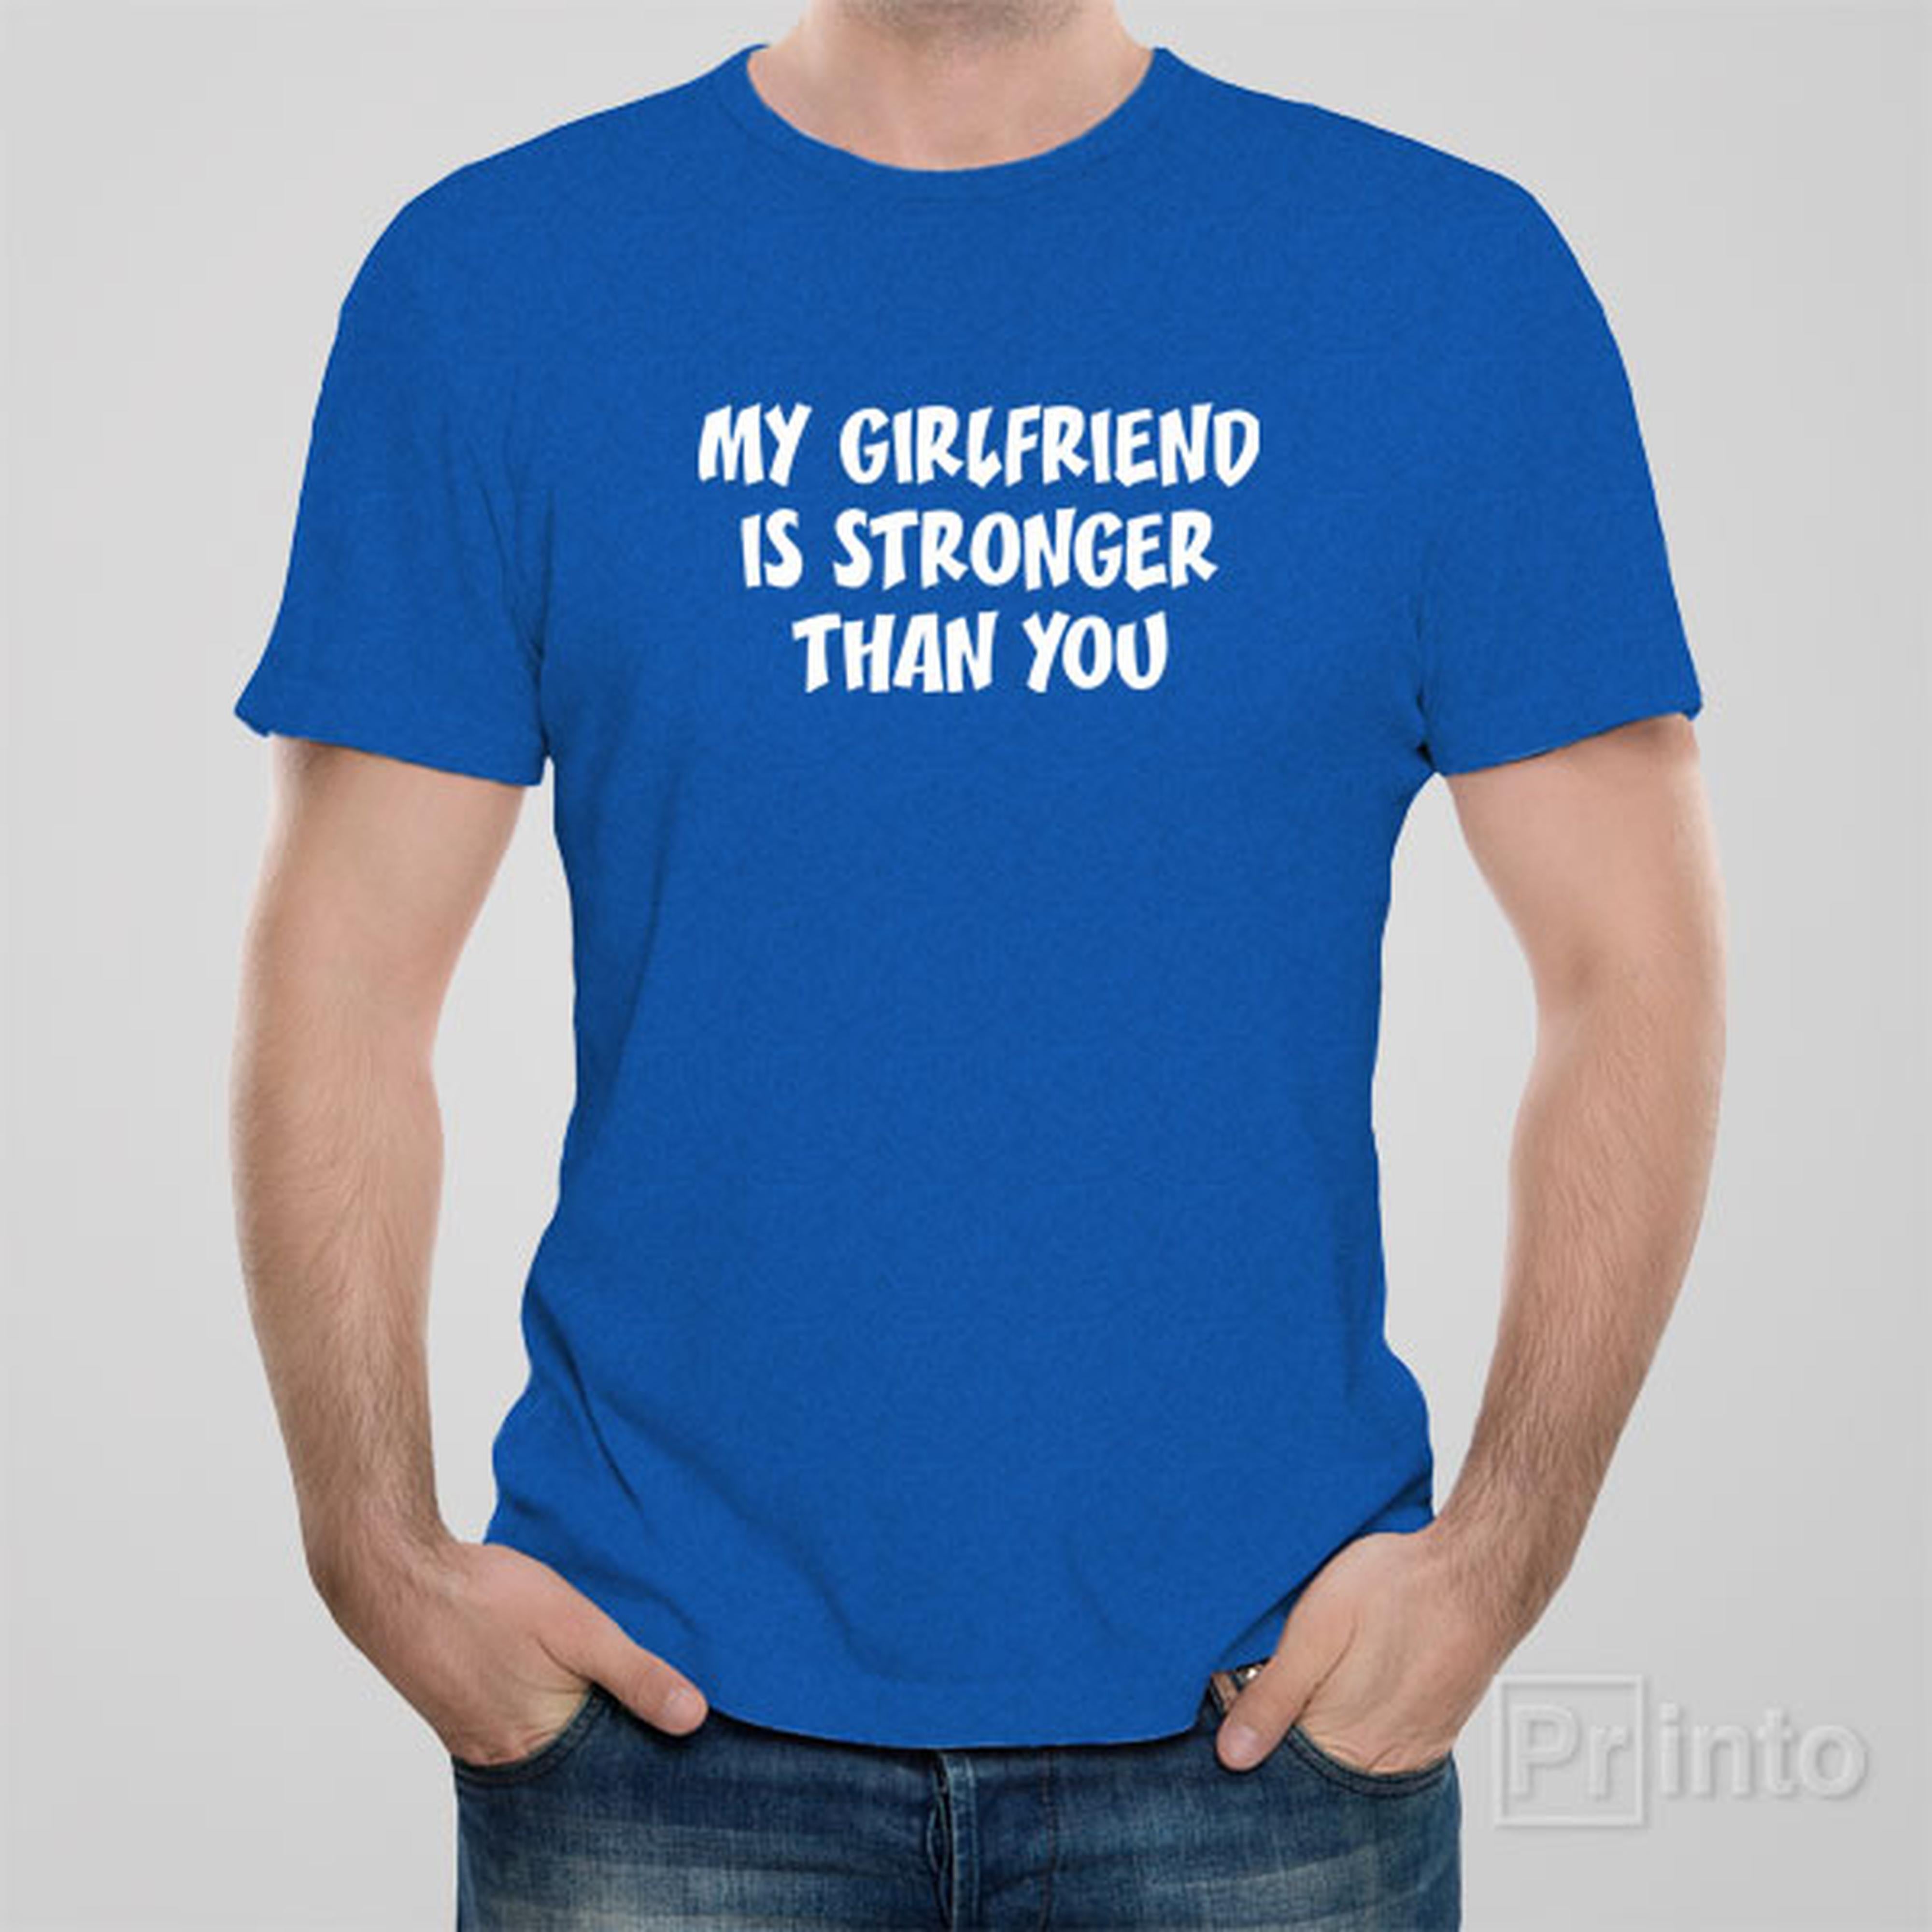 my-girlfriend-is-stronger-than-you-t-shirt